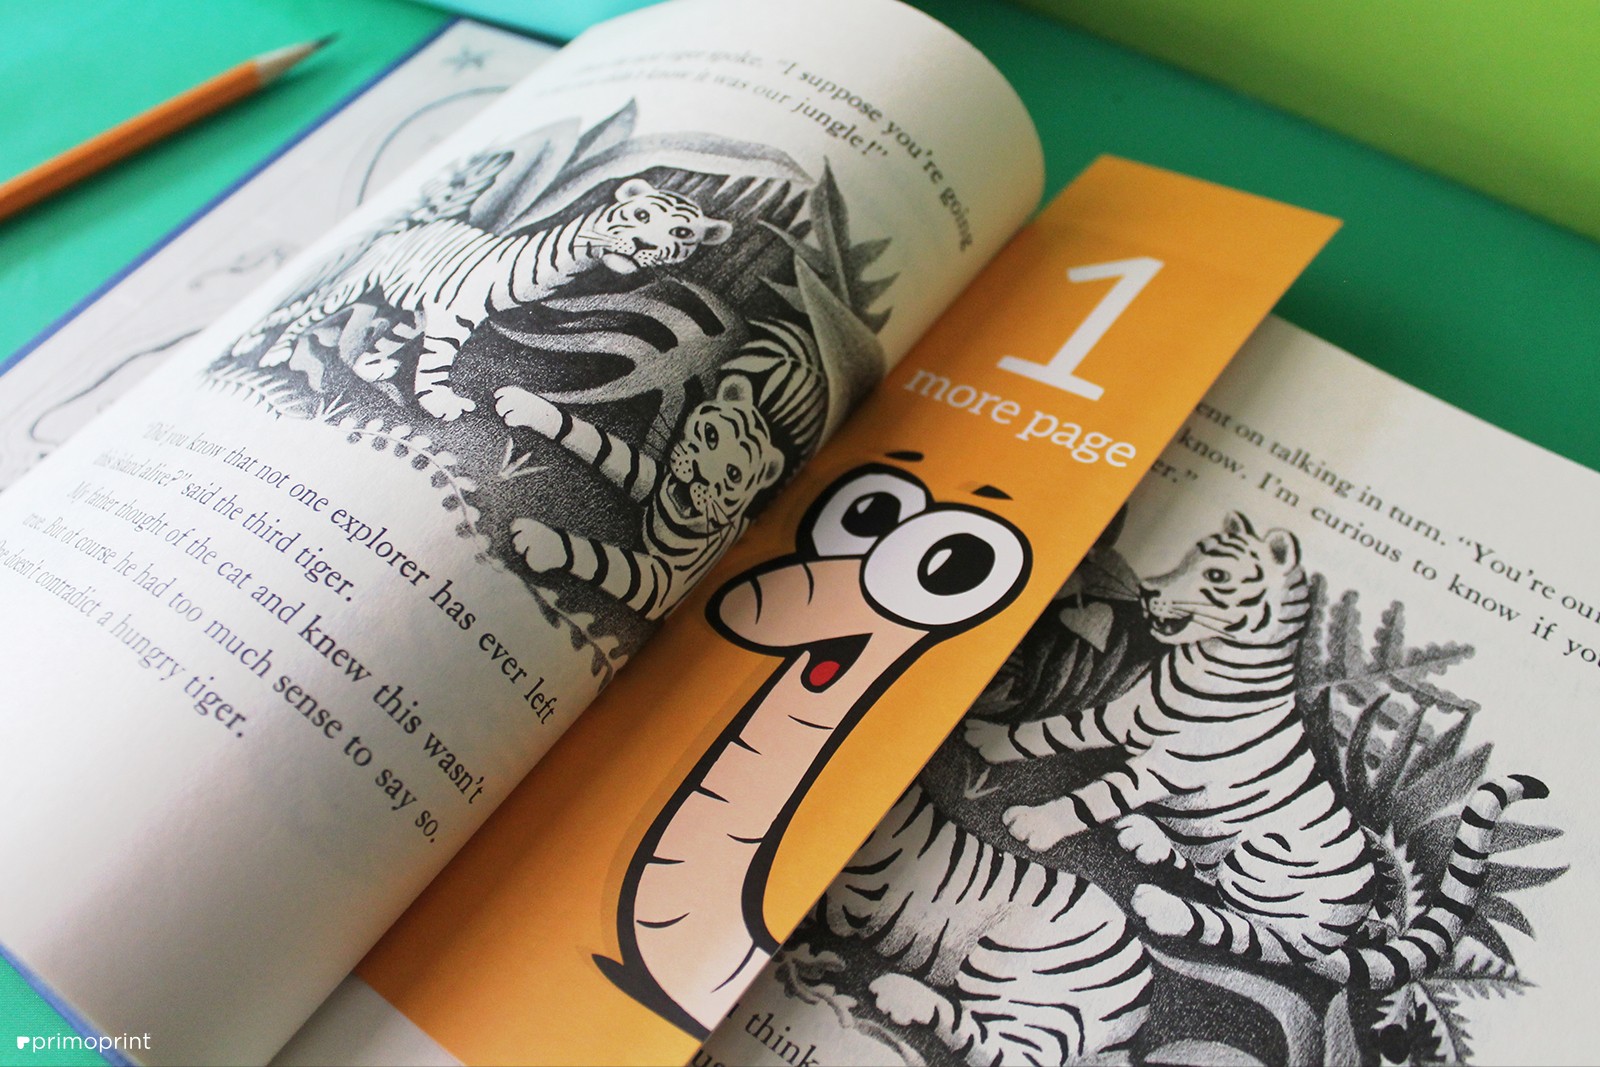 Leave a lasting impression on your readers with custom designed and printed bookmarks.